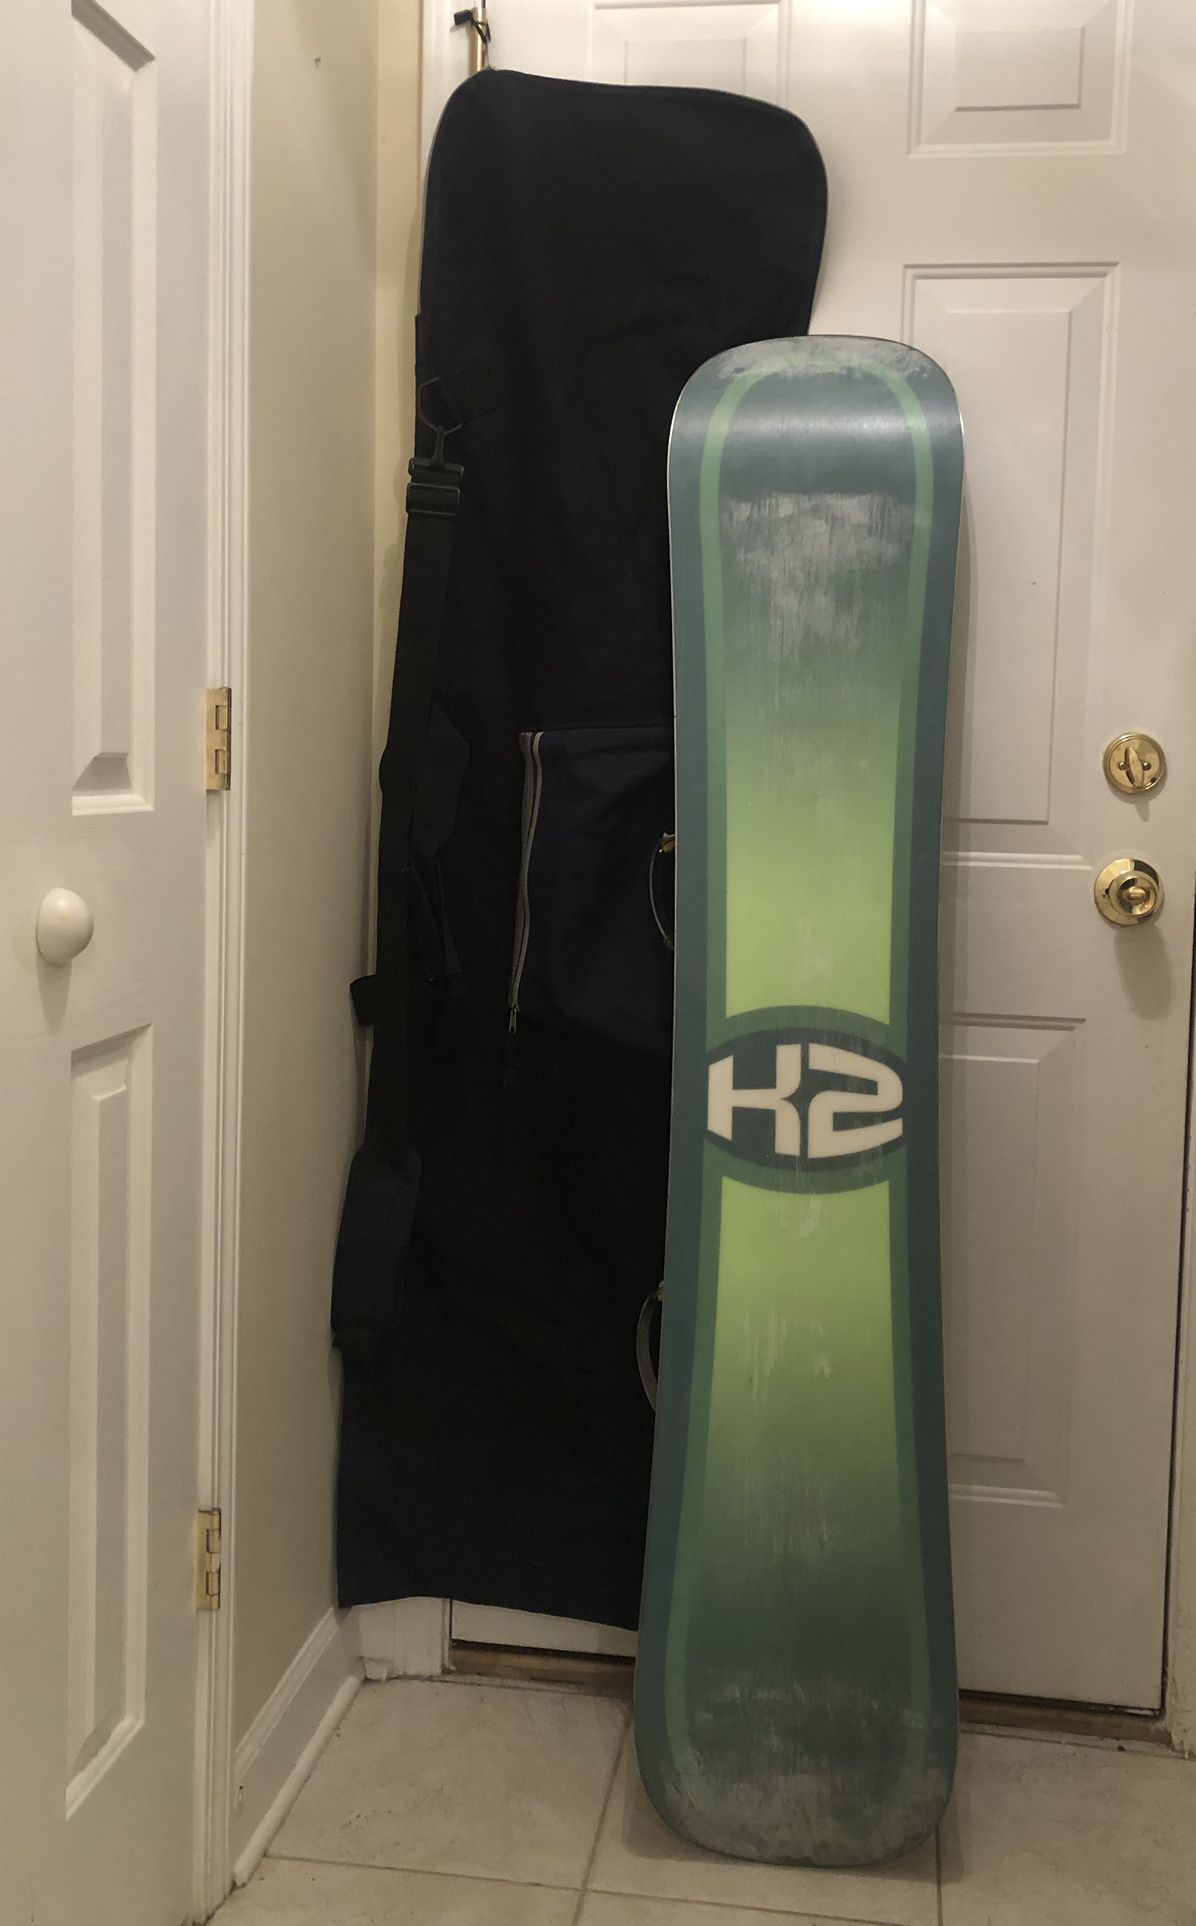 K2 Double Wide 160 Snowboard & Bag - will remove stickers upon request